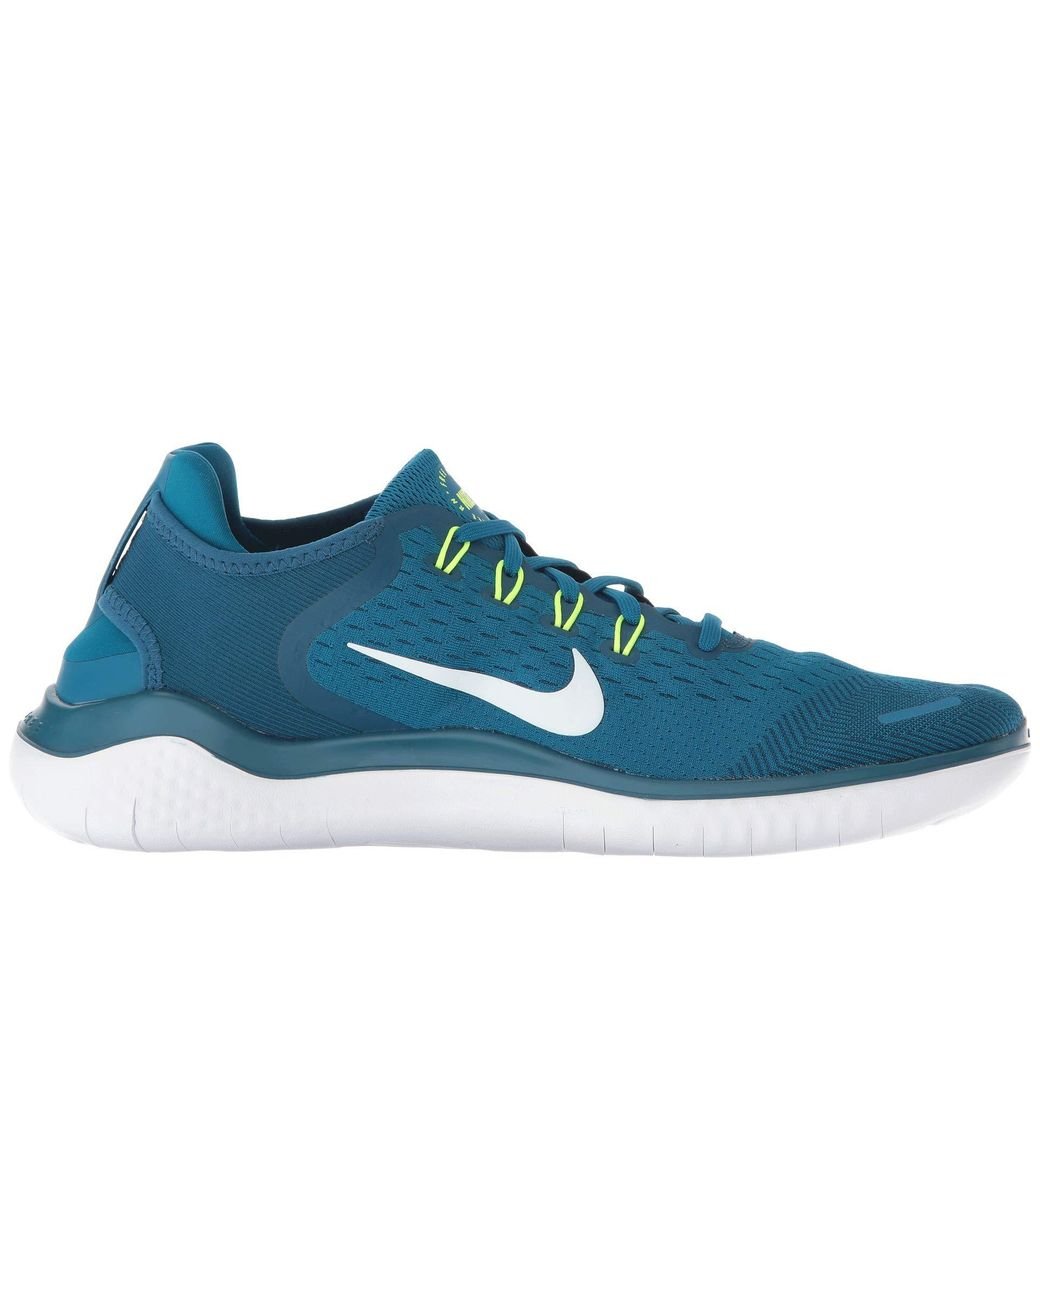 Nike Free Rn 2018 (blue Force/white/green Abyss) Men's Running Shoes |